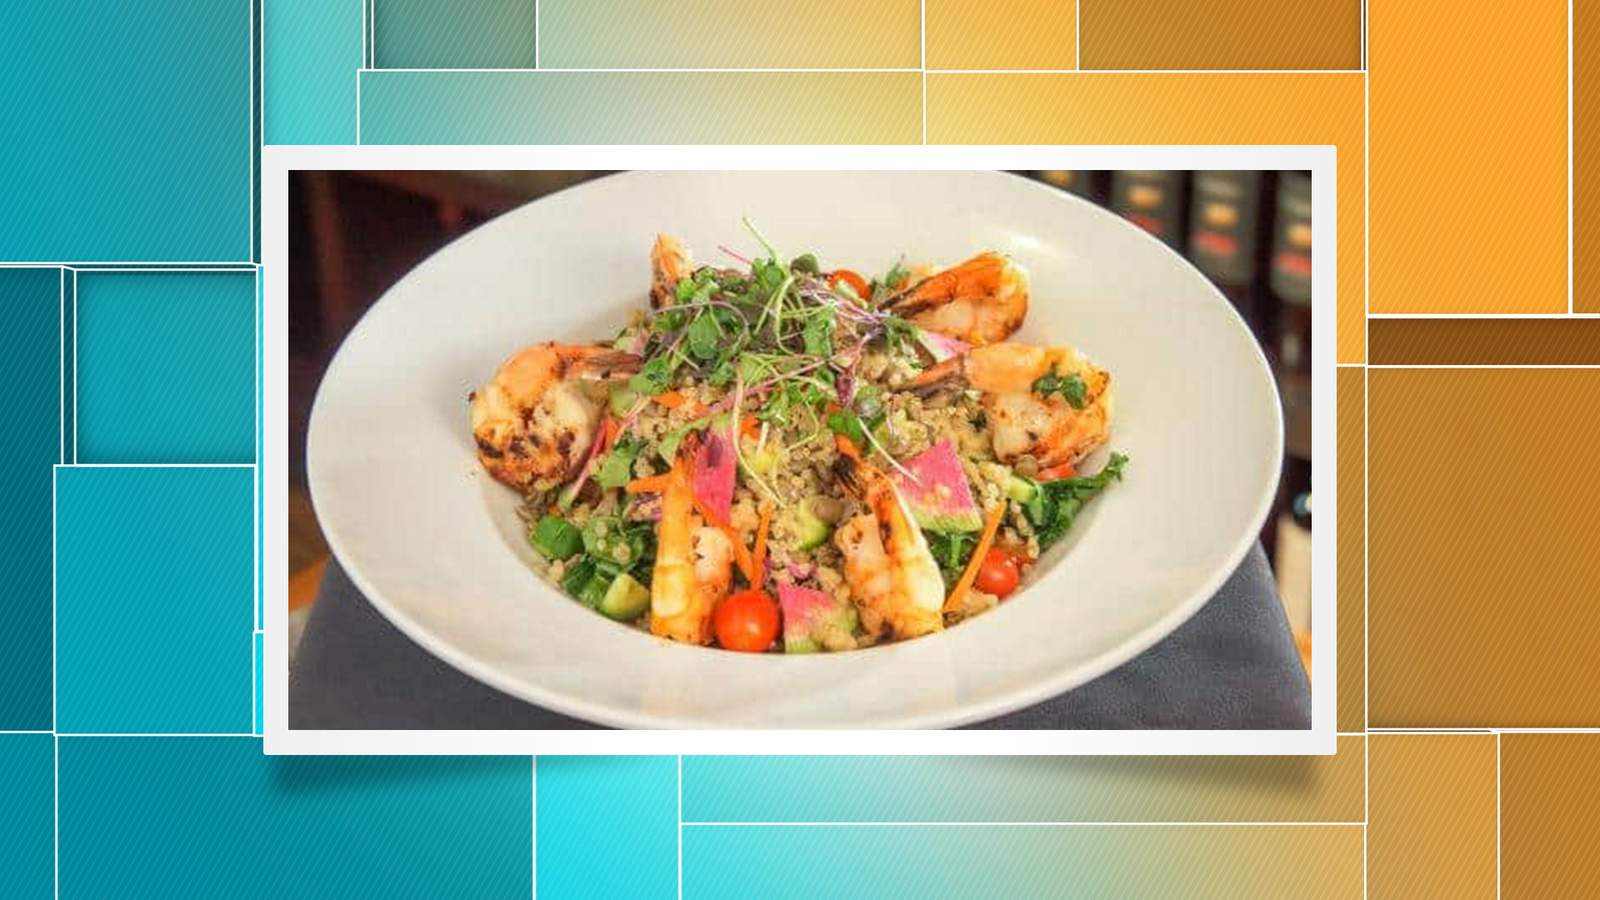 Tanji Patton of Goodtaste TV shares ‘flexitarian’ meal options at local restaurants